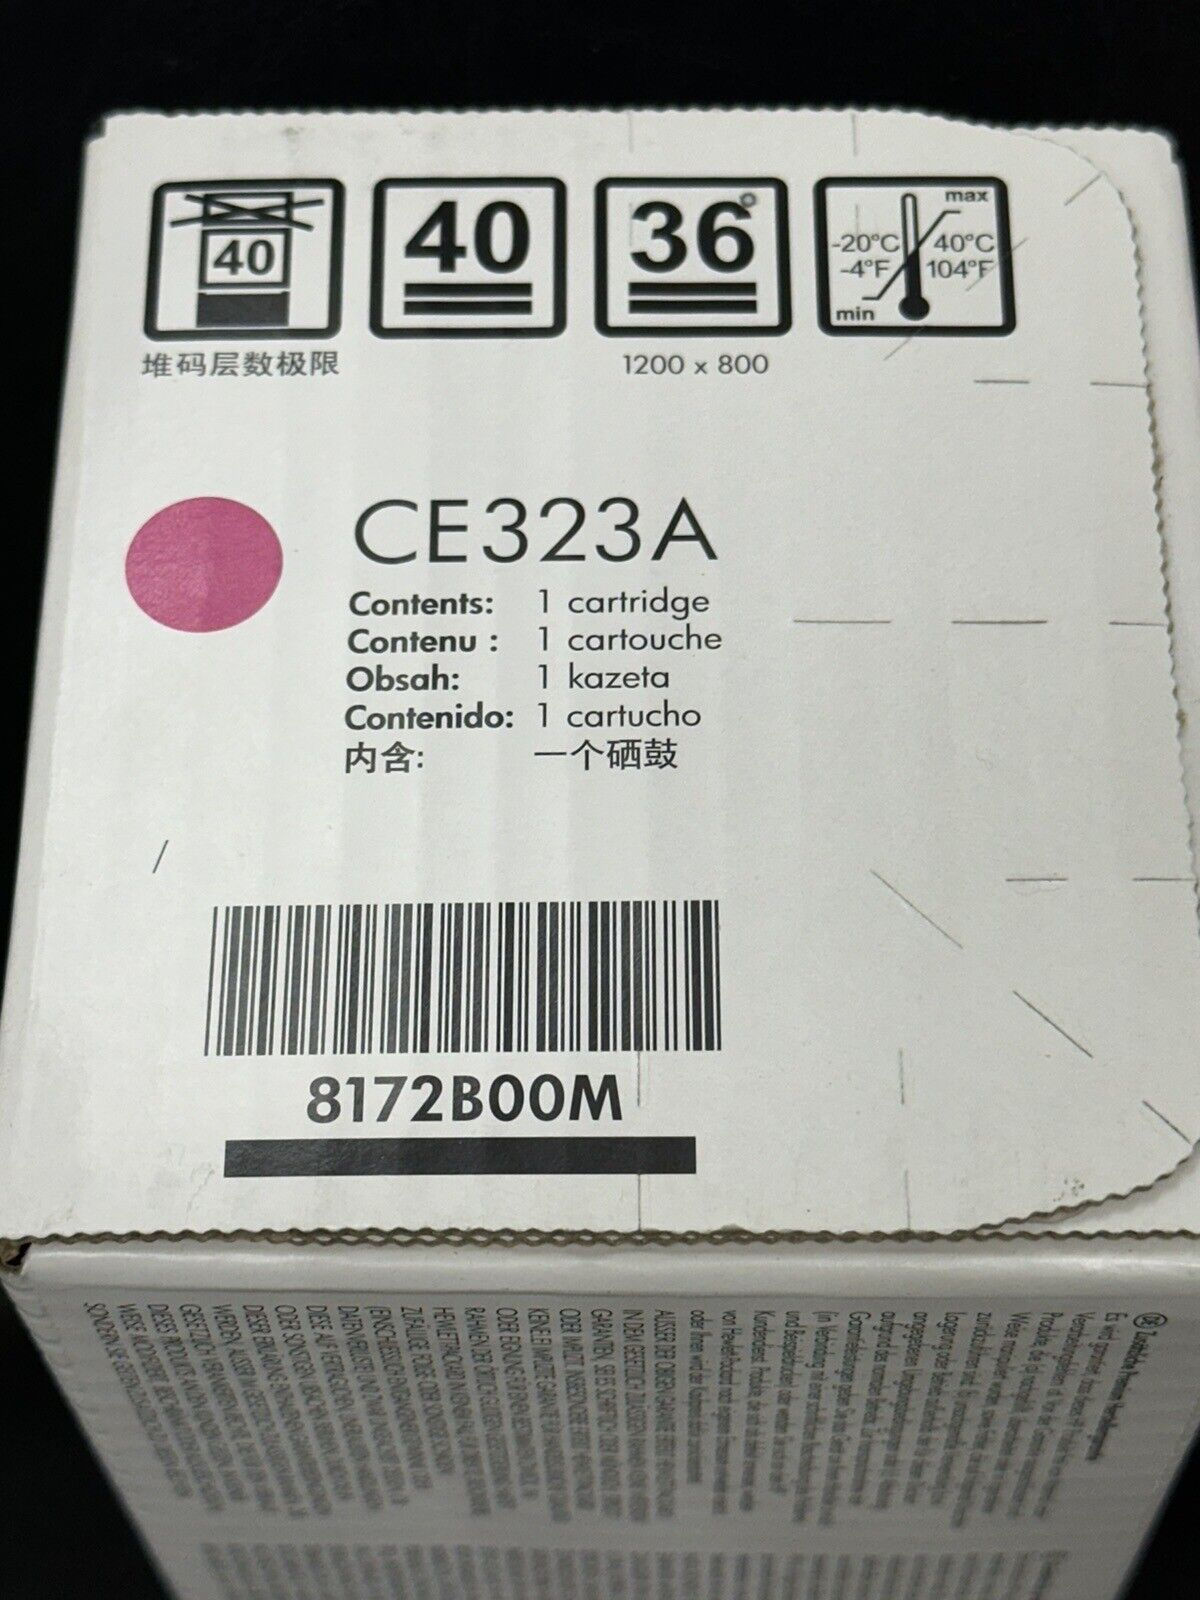 HP 128A Toner Cartridge - Magenta (CE323A). Magenta Only. One Part Of A 3 Pack.